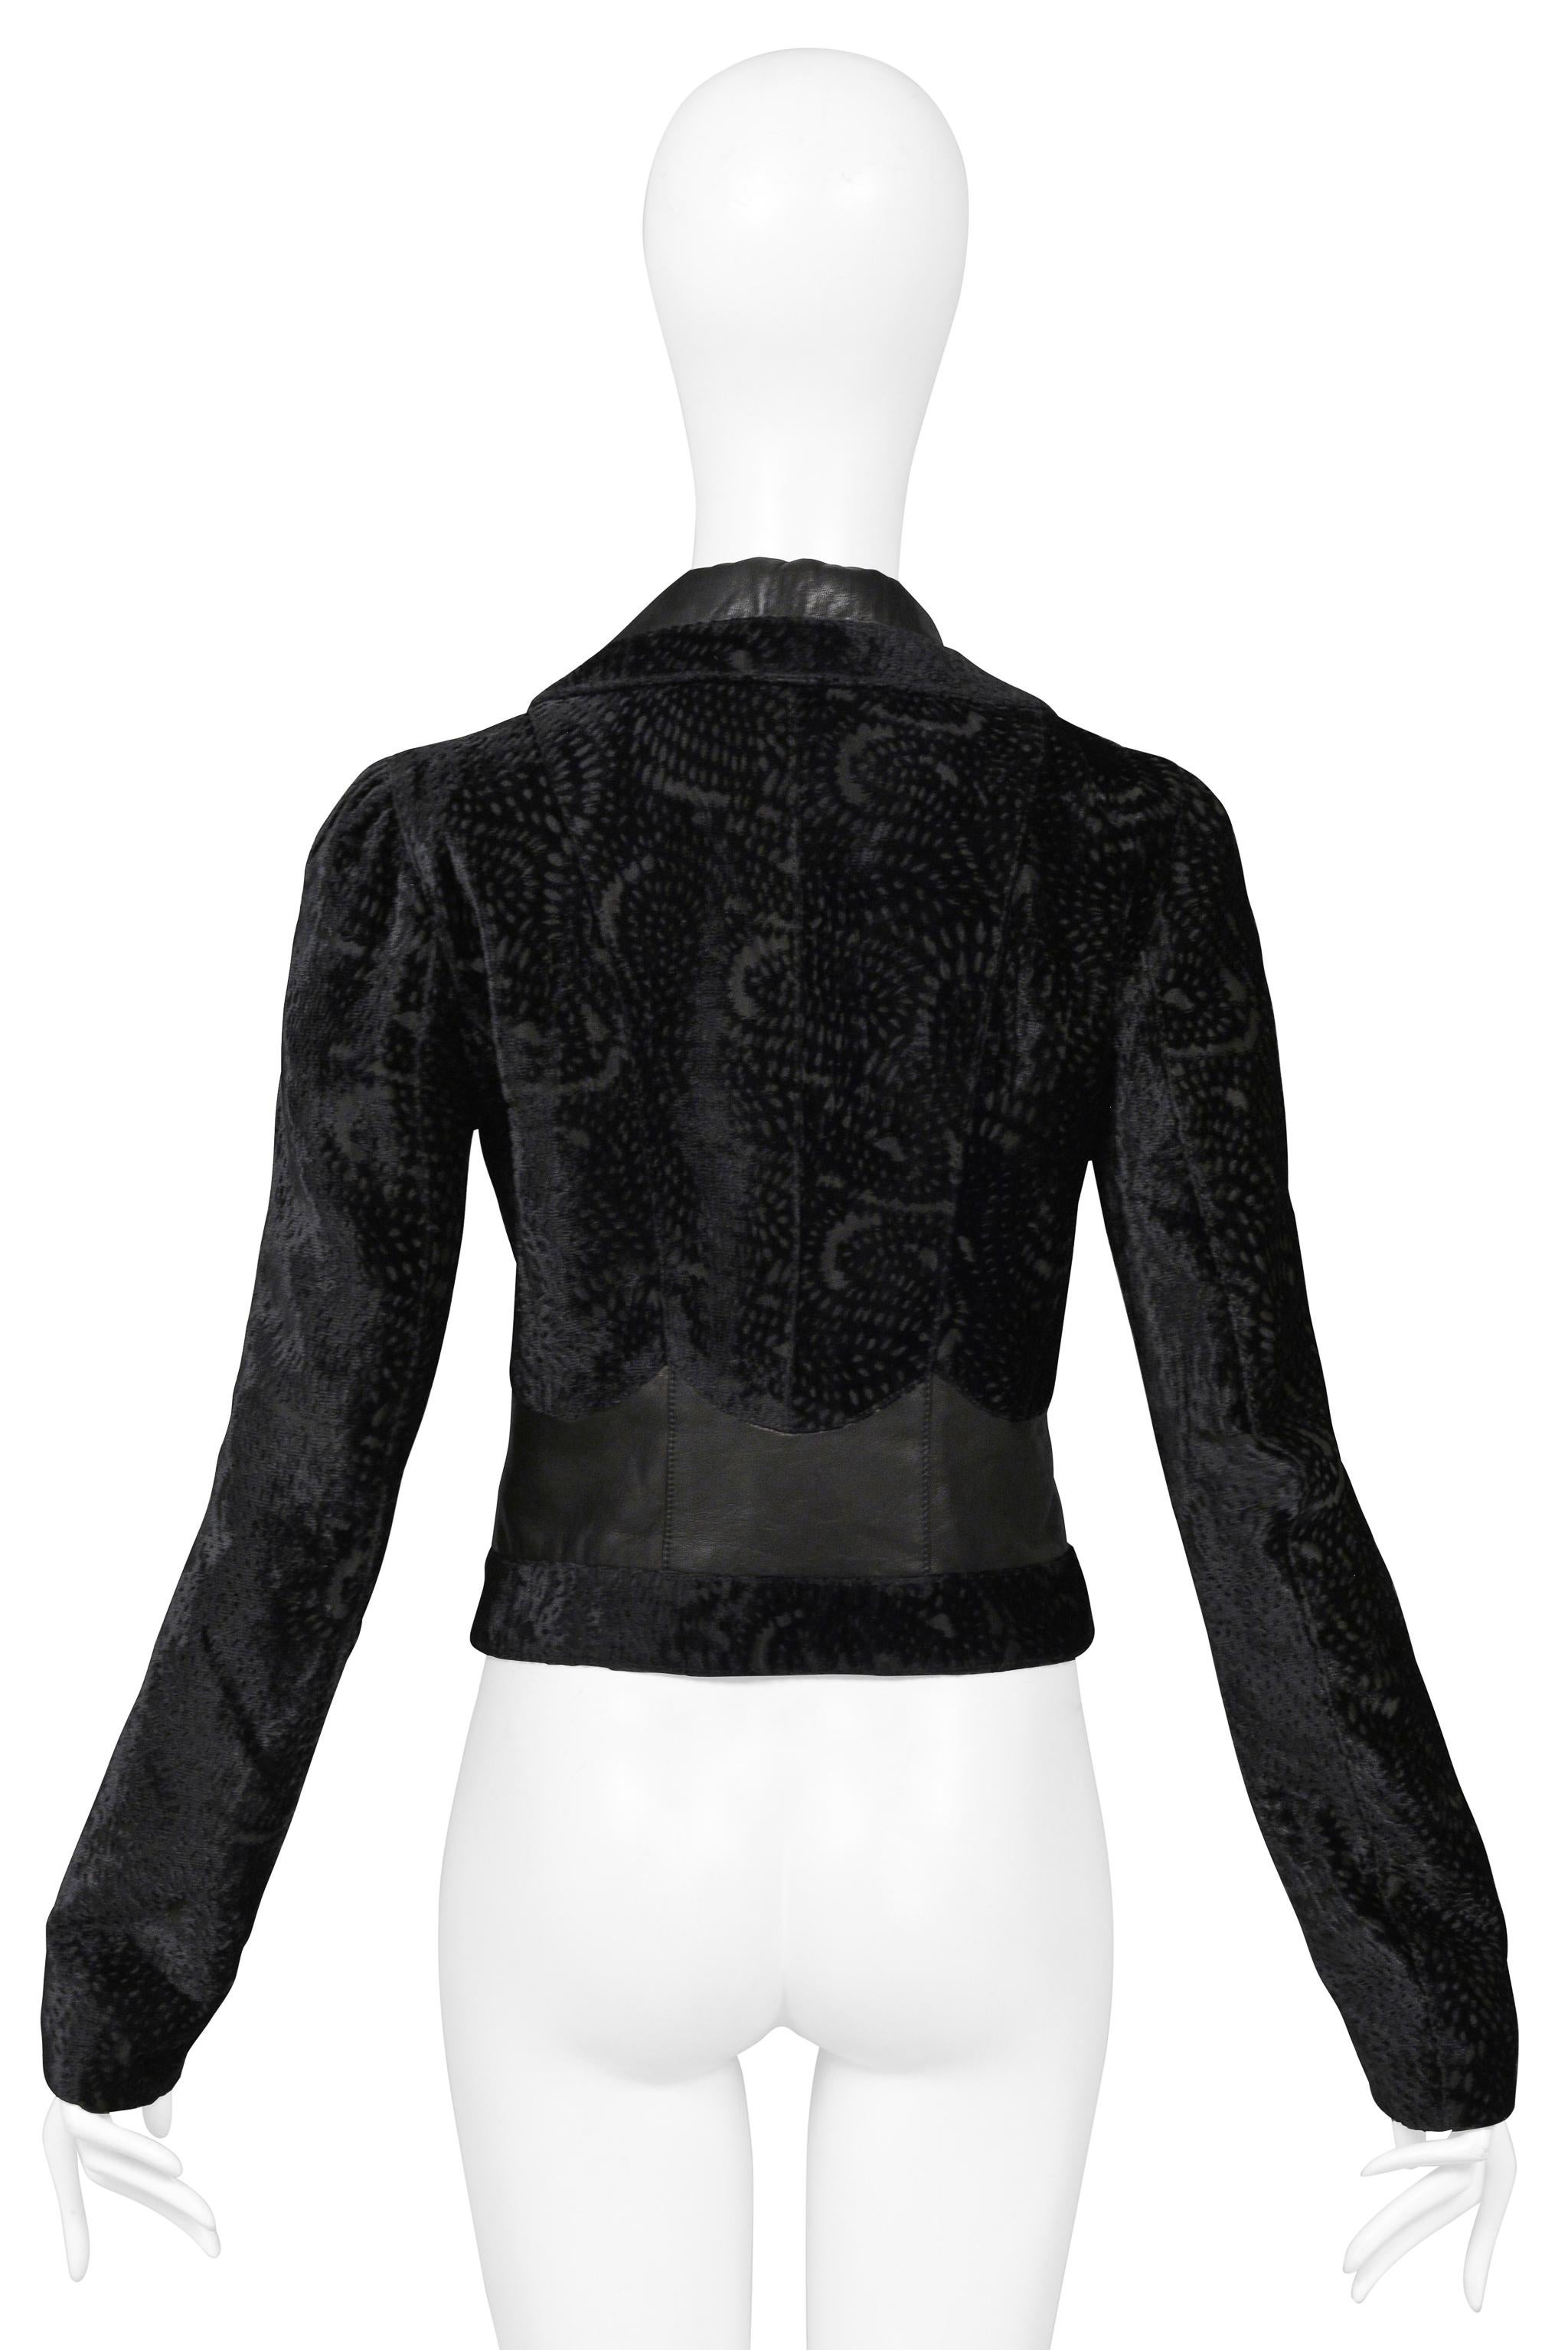 John Galliano Black Floral Silk Velvet Jacket With Leather Insets 2005 For Sale 2